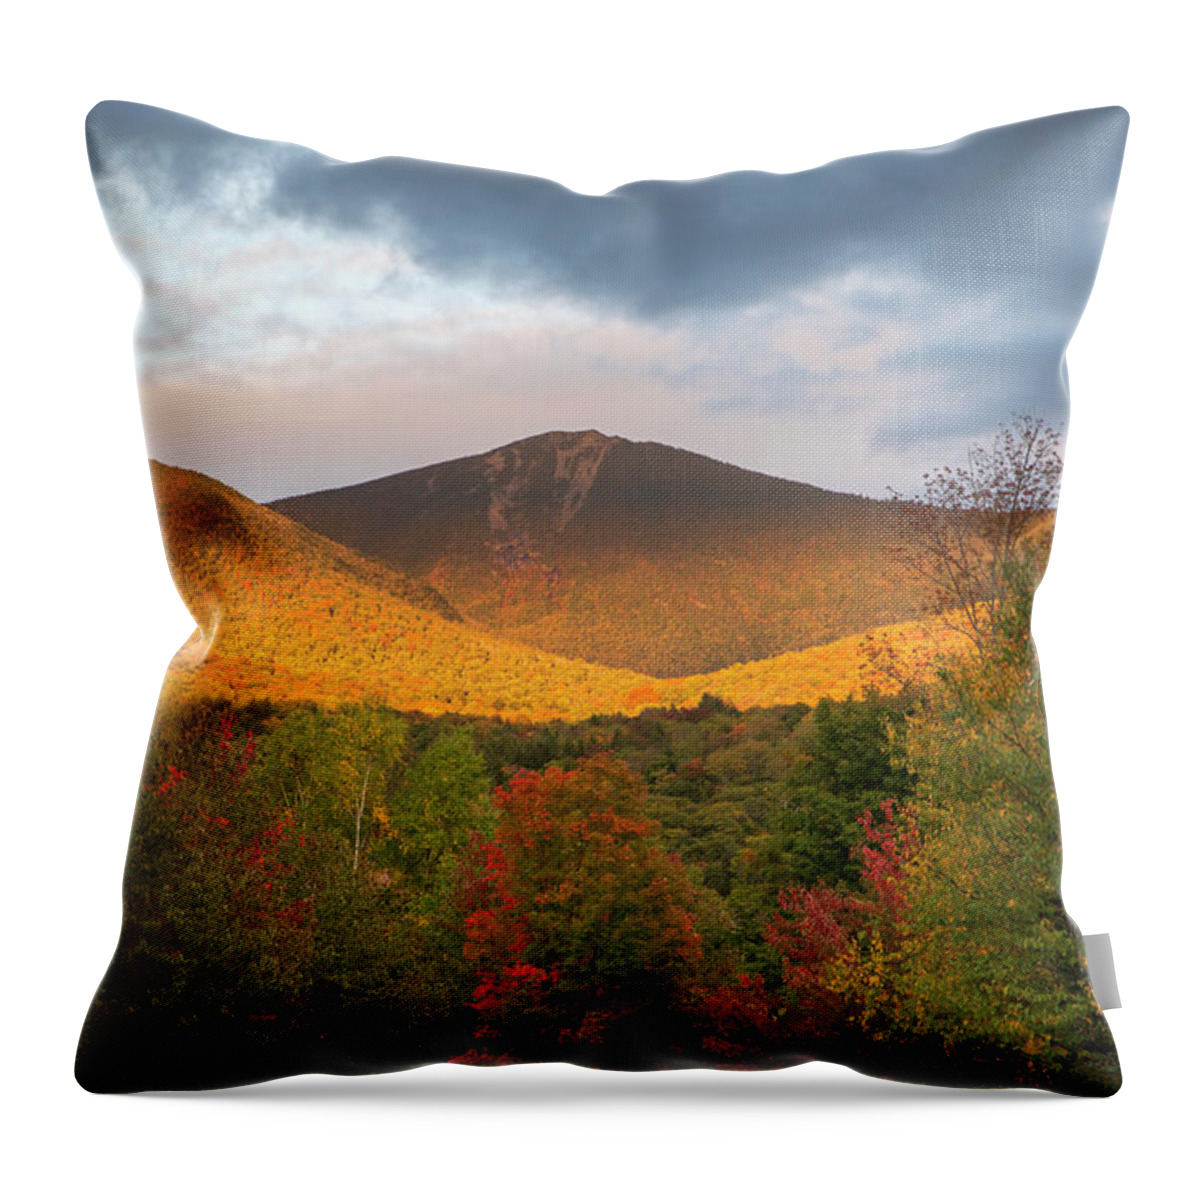 Mount Throw Pillow featuring the photograph Mount Flume Autumn Sunset by White Mountain Images